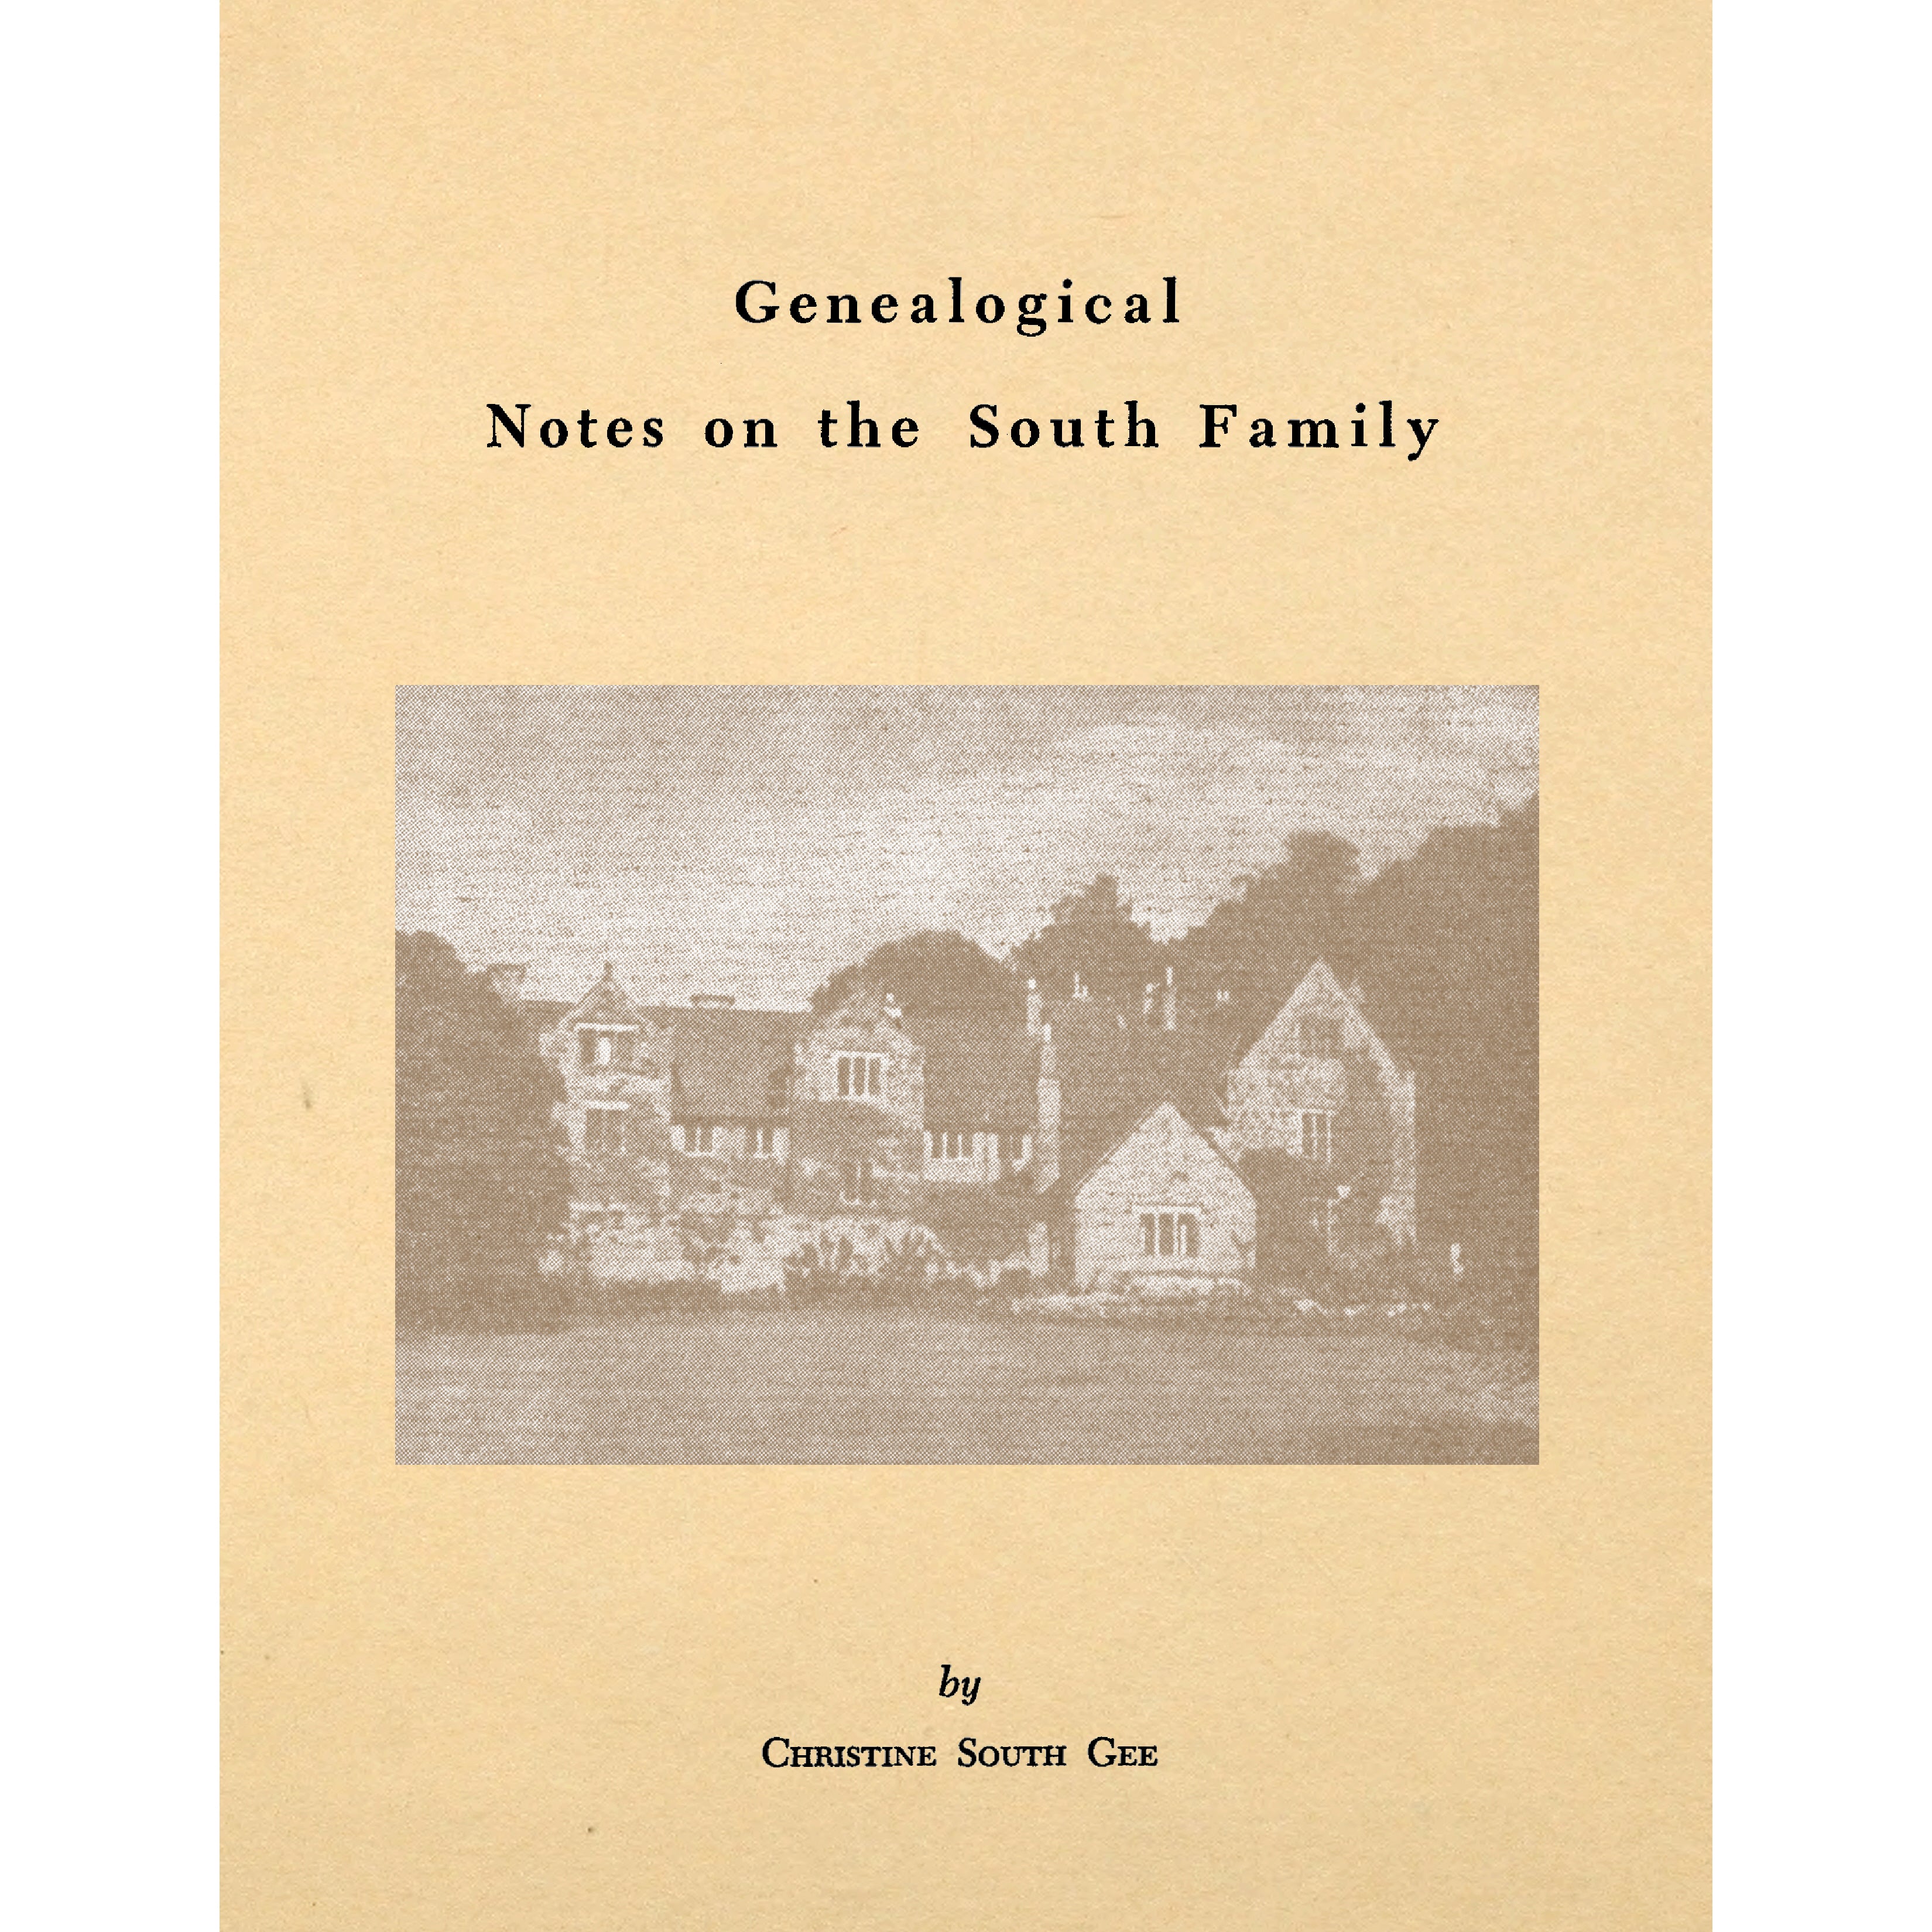 Genealogical Notes on the South Family